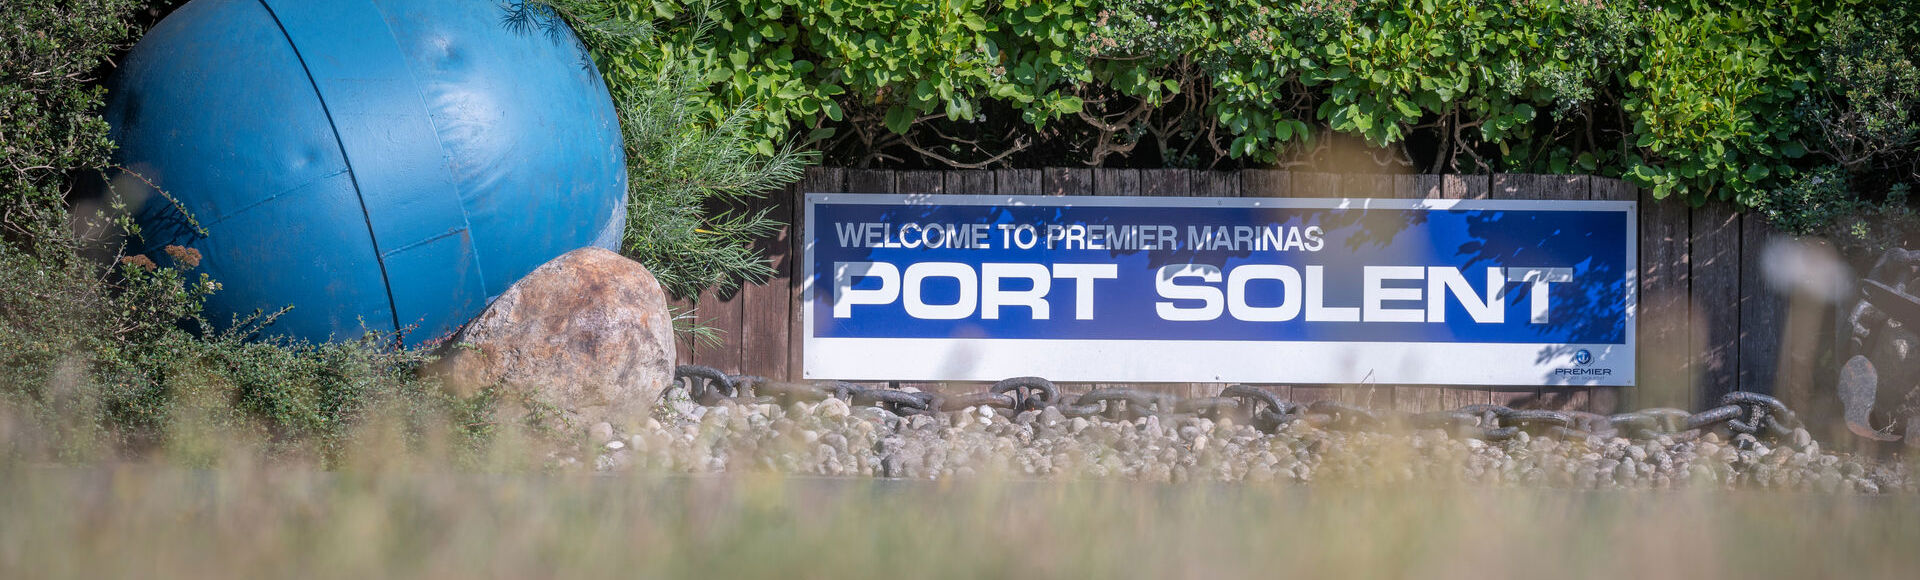 Port Solent 22 066 NW Banner Without Weather 1920X685